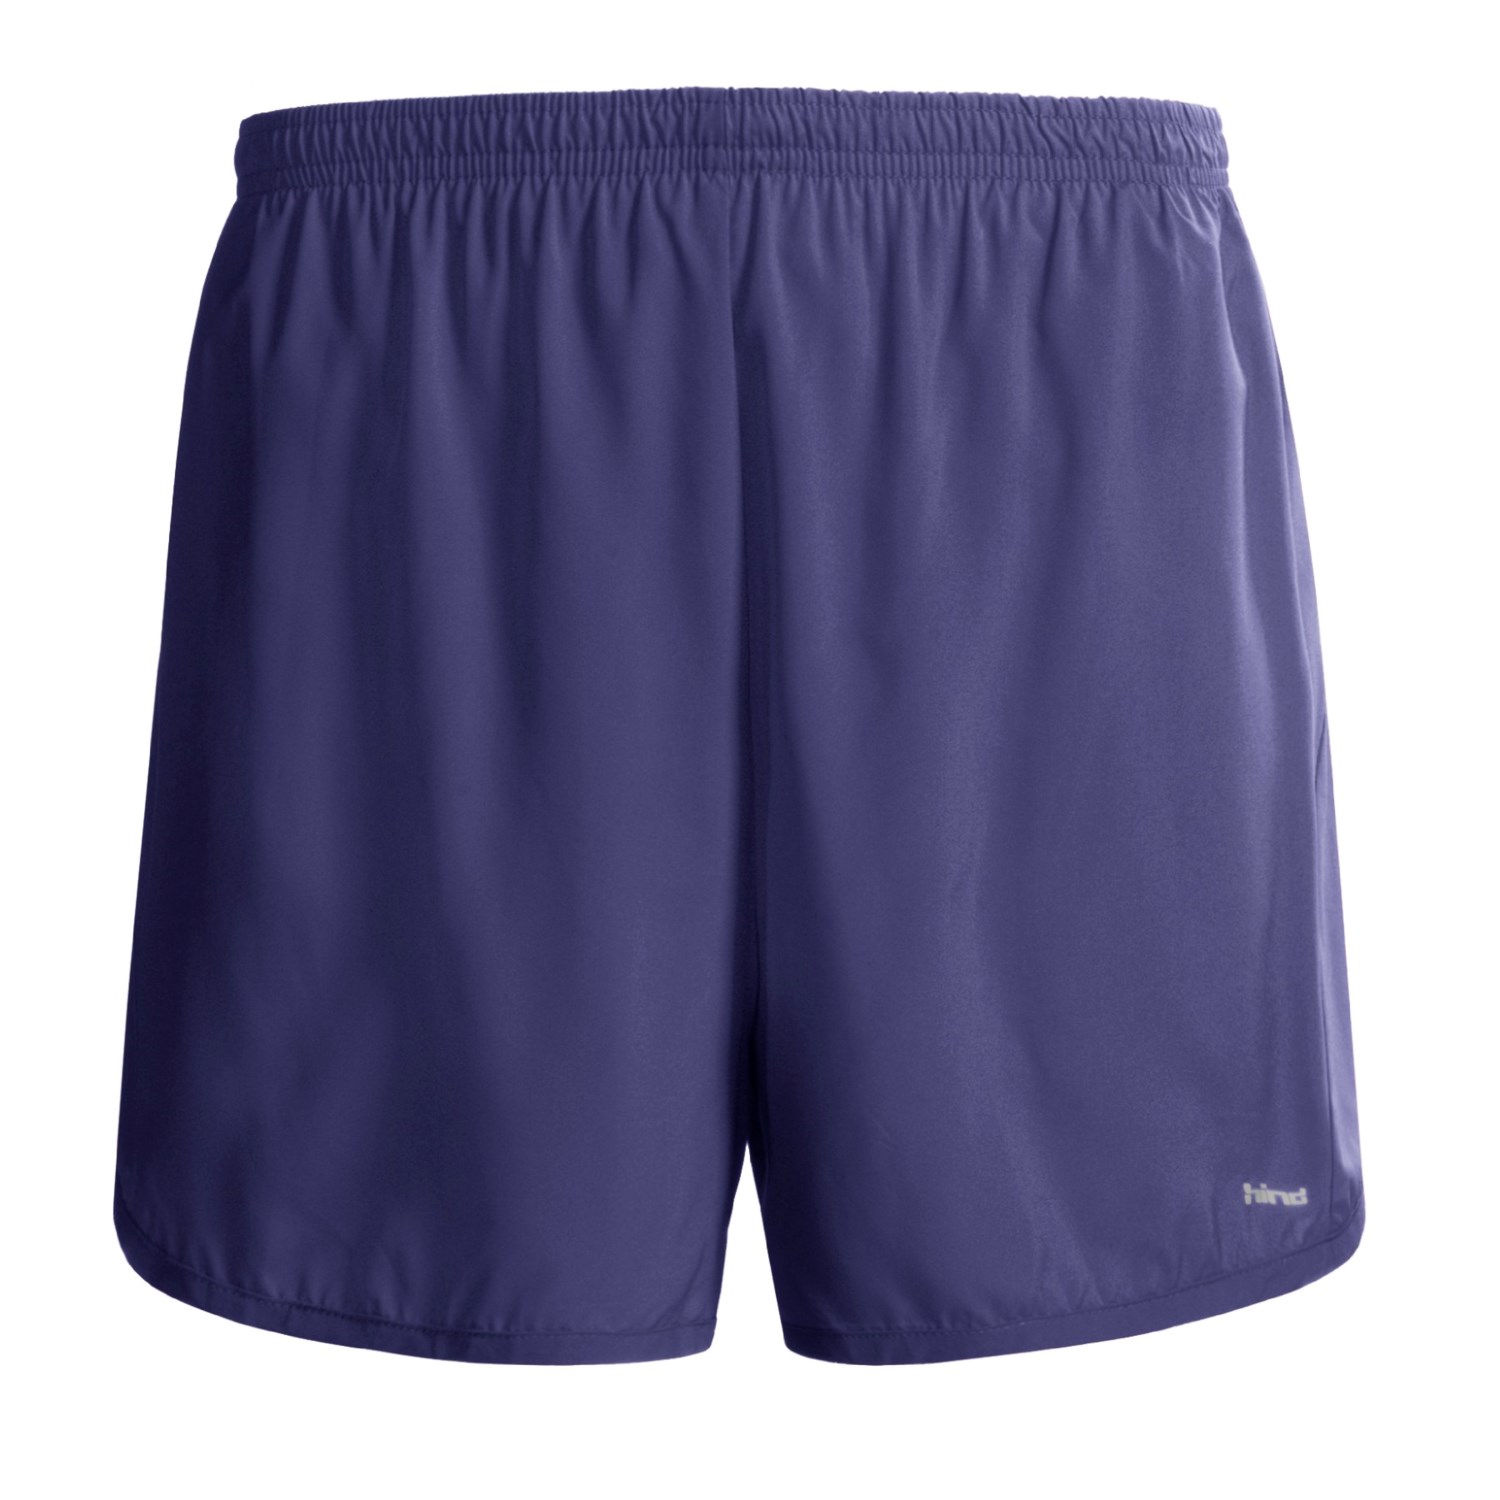 Hind Athletic Shorts (For Men) 57932 - Save 71%